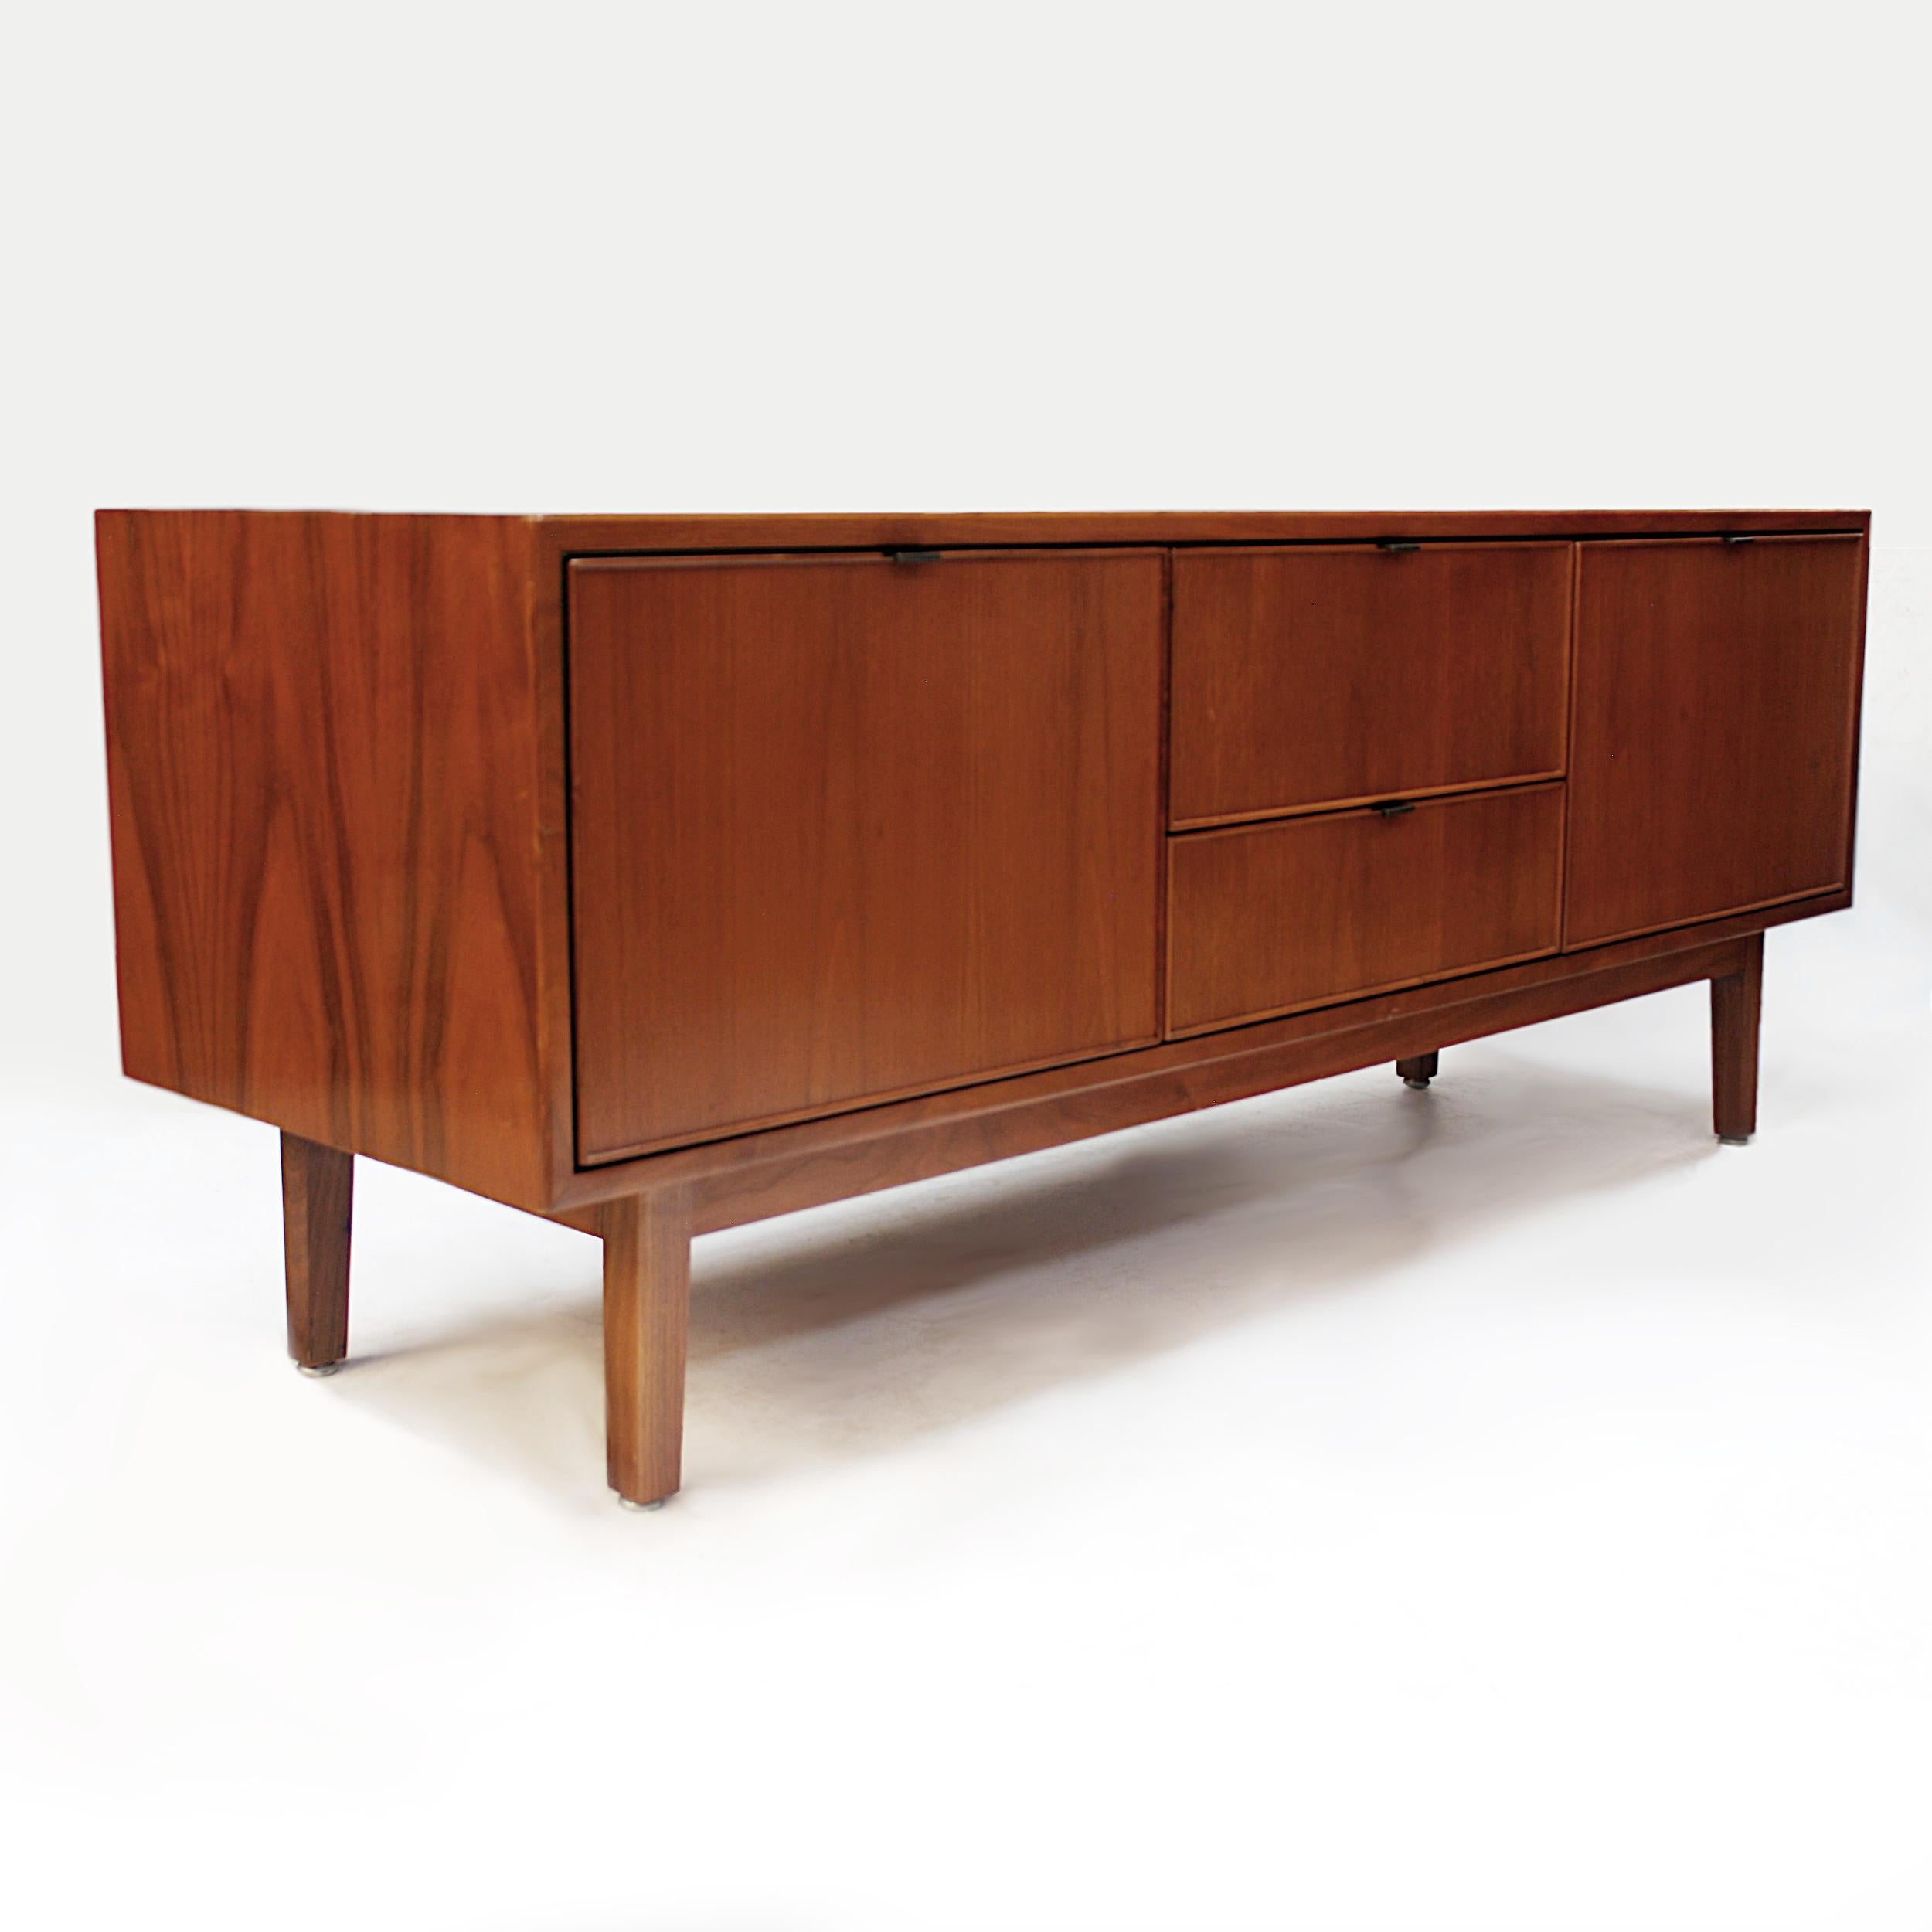 This wonderful Mid-Century Modern credenza by Stow Davis is full of unique features. Designed by Alexis Yermakov as part of the 